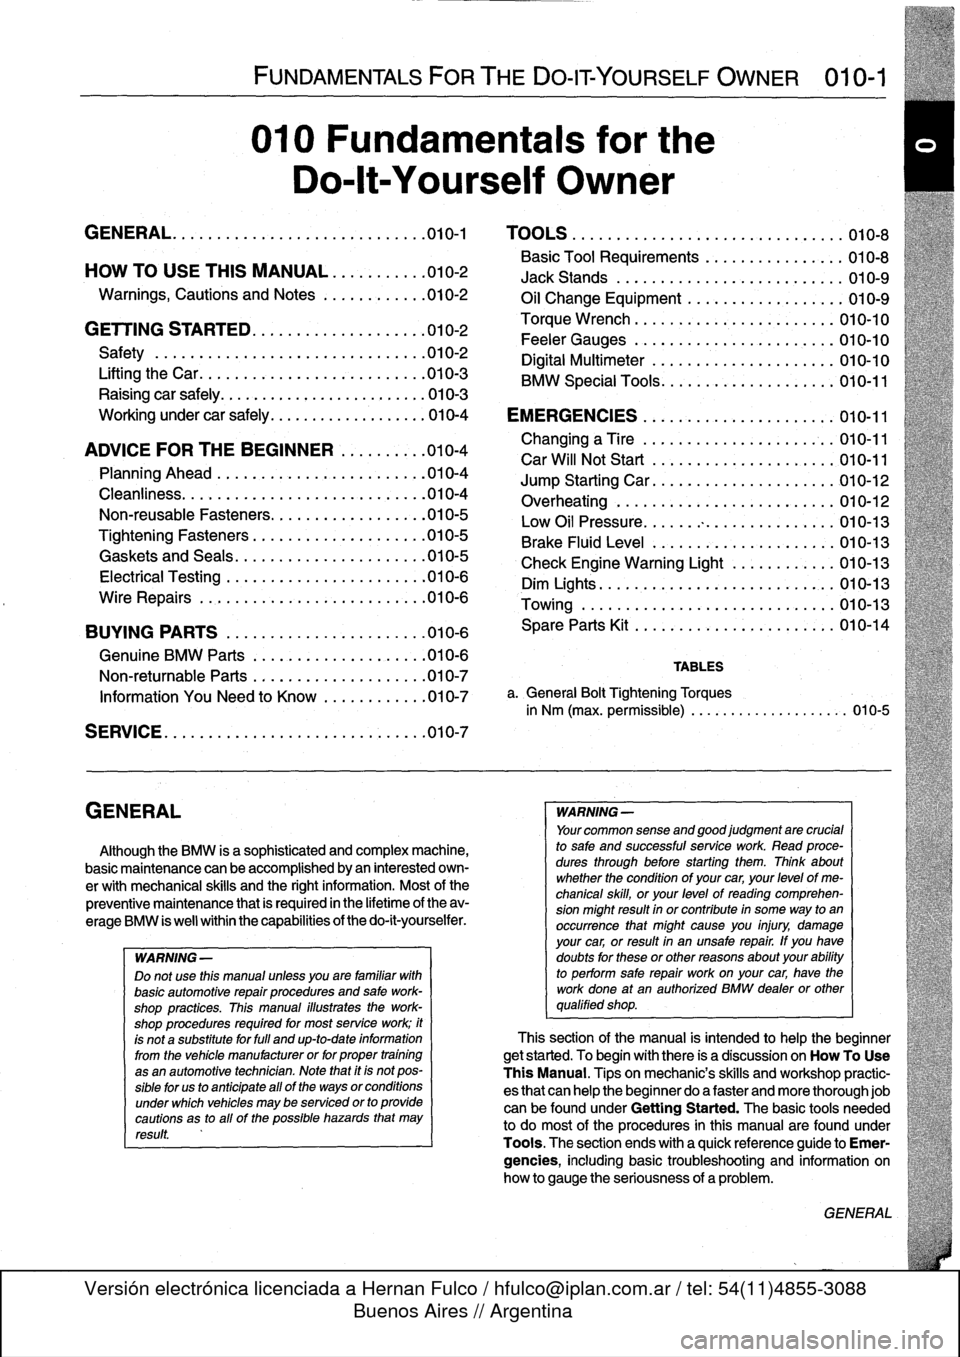 BMW 325i 1992 E36 Workshop Manual 
GENERAL

FUNDAMENTALS
FORTHE
DO-IT
YOURSELF
OWNER

	

010-1

010
Fundamentals
for
the

Do-lt-Yourself
Owner

GENERAL
.......
.
.
.
......
.
.........
.
.
.010-1

	

TOOLS
.
.
...
.
............
.
...